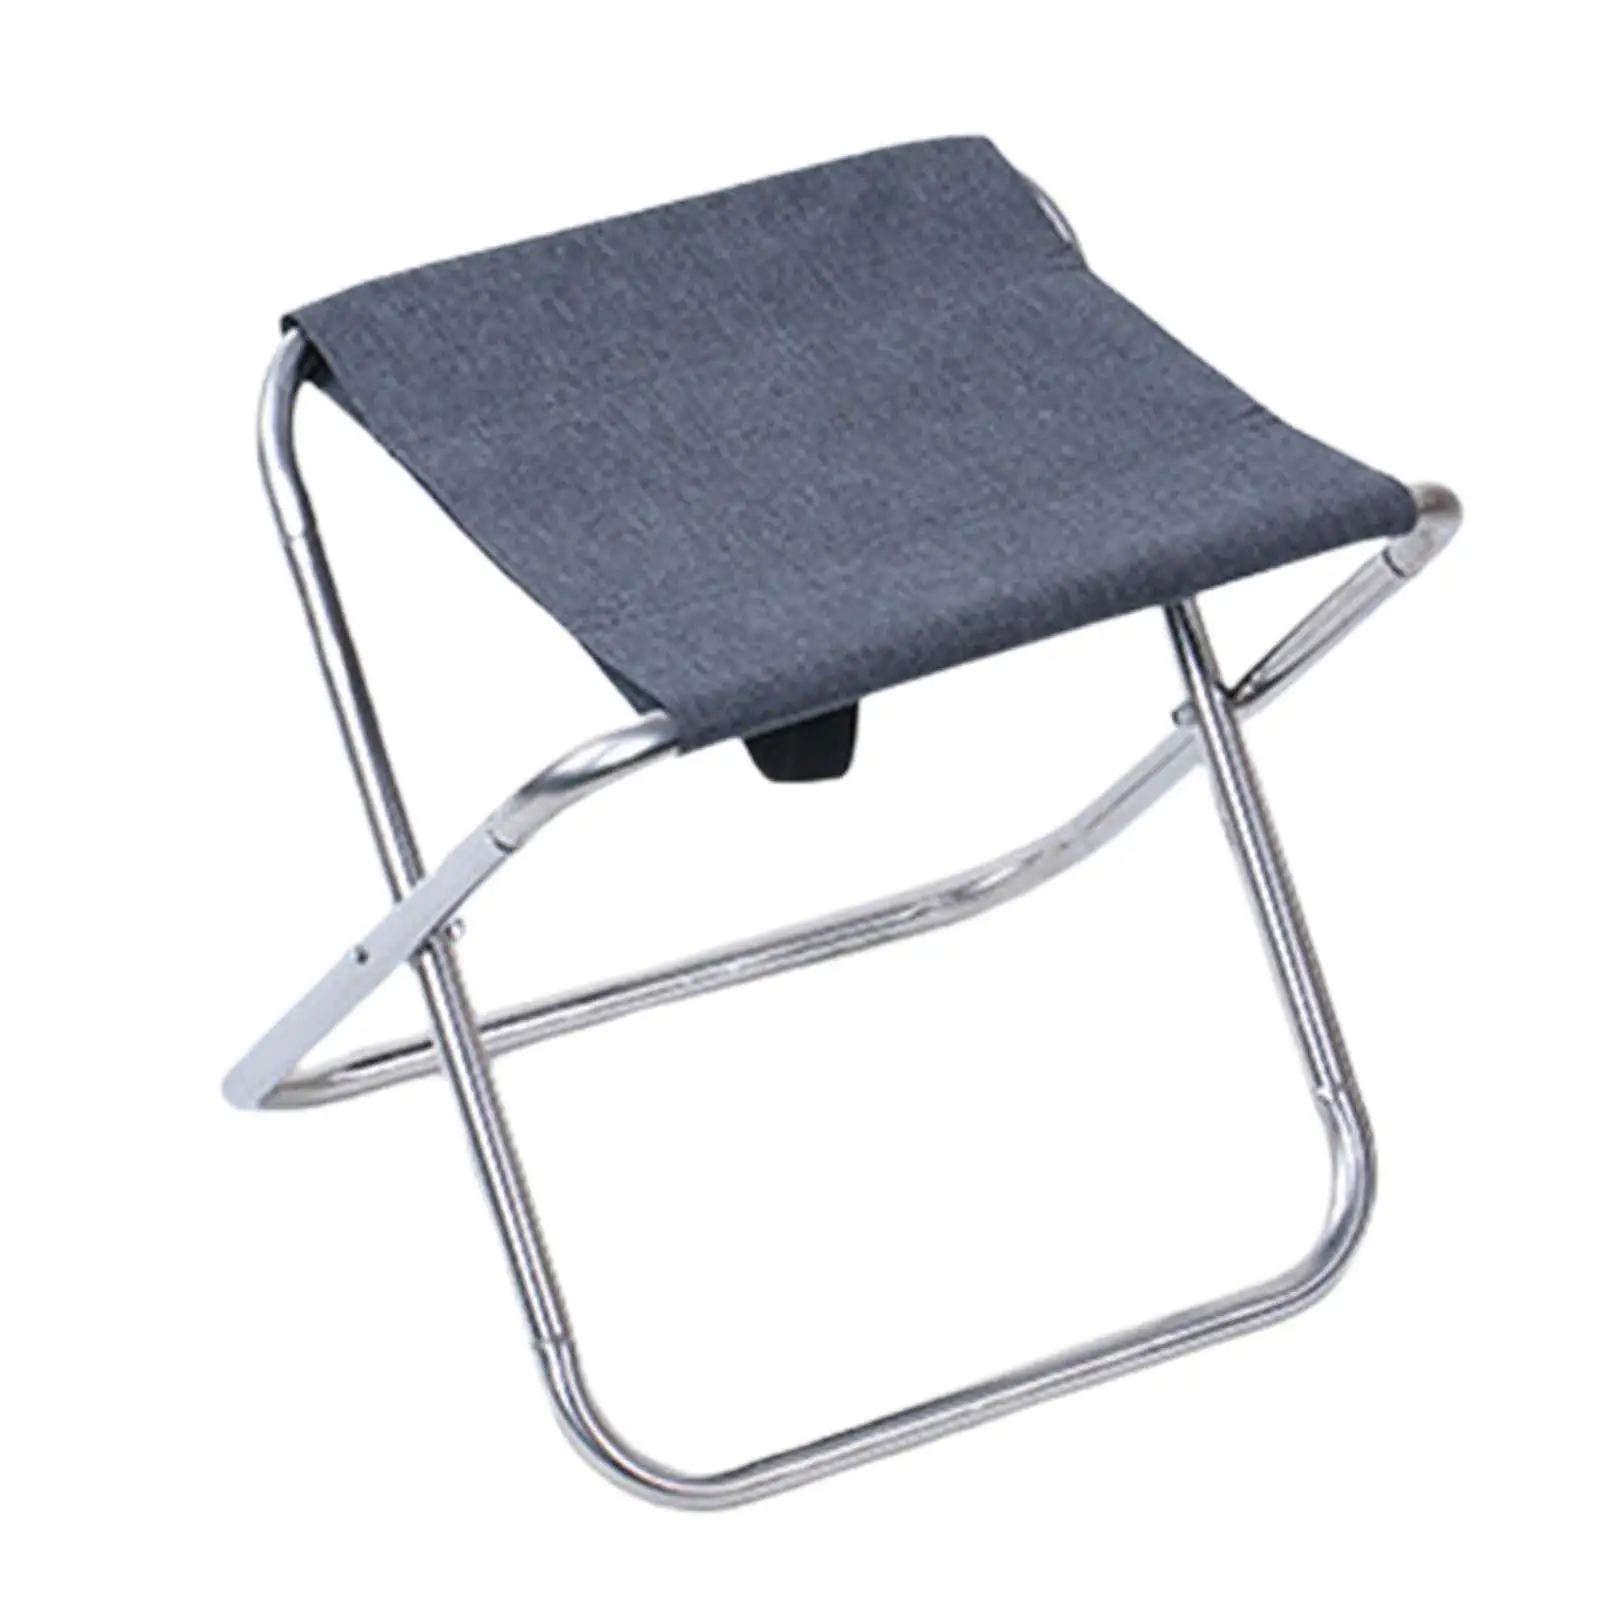 Camping Stool Folding Adults Strong Load Capacity Camping Chair Picnic Chair Portable for Party Patio Traveling Gardening Hiking